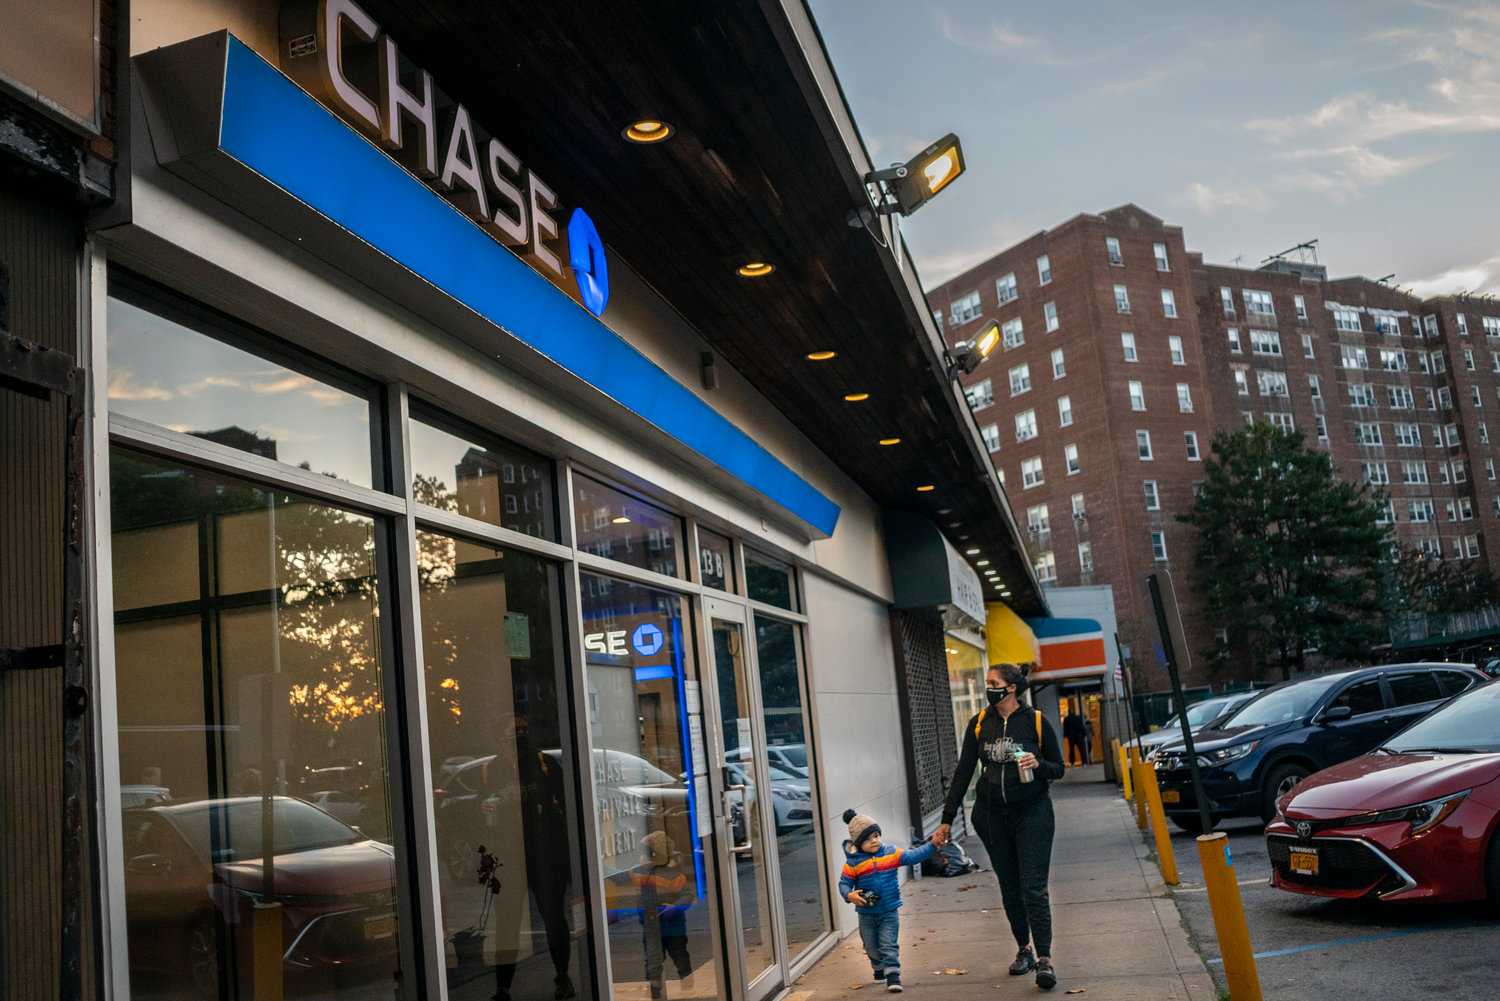 What impact can one branch of a national bank have on a neighborhood? Quite a big one, apparently. After Chase Bank customers in Knolls Crescent received notice that location would close later this year, politicians and neighbors have banded together, asking them to stay open.